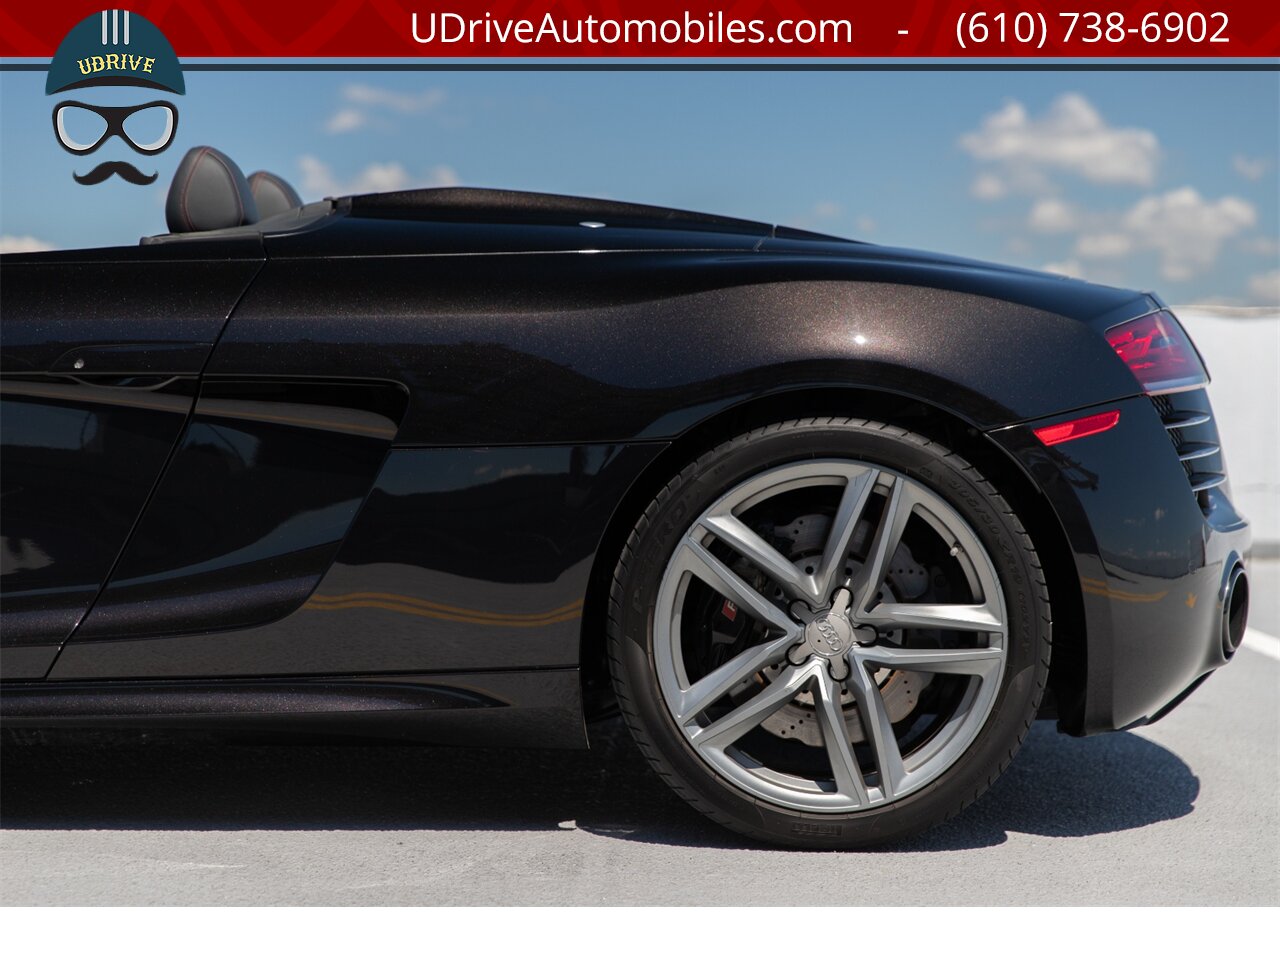 2014 Audi R8 5.2 V10 Quattro Spyder 6 Speed Manual 2k Miles  Extremely RARE 1 of 1 Color Combo - Photo 25 - West Chester, PA 19382